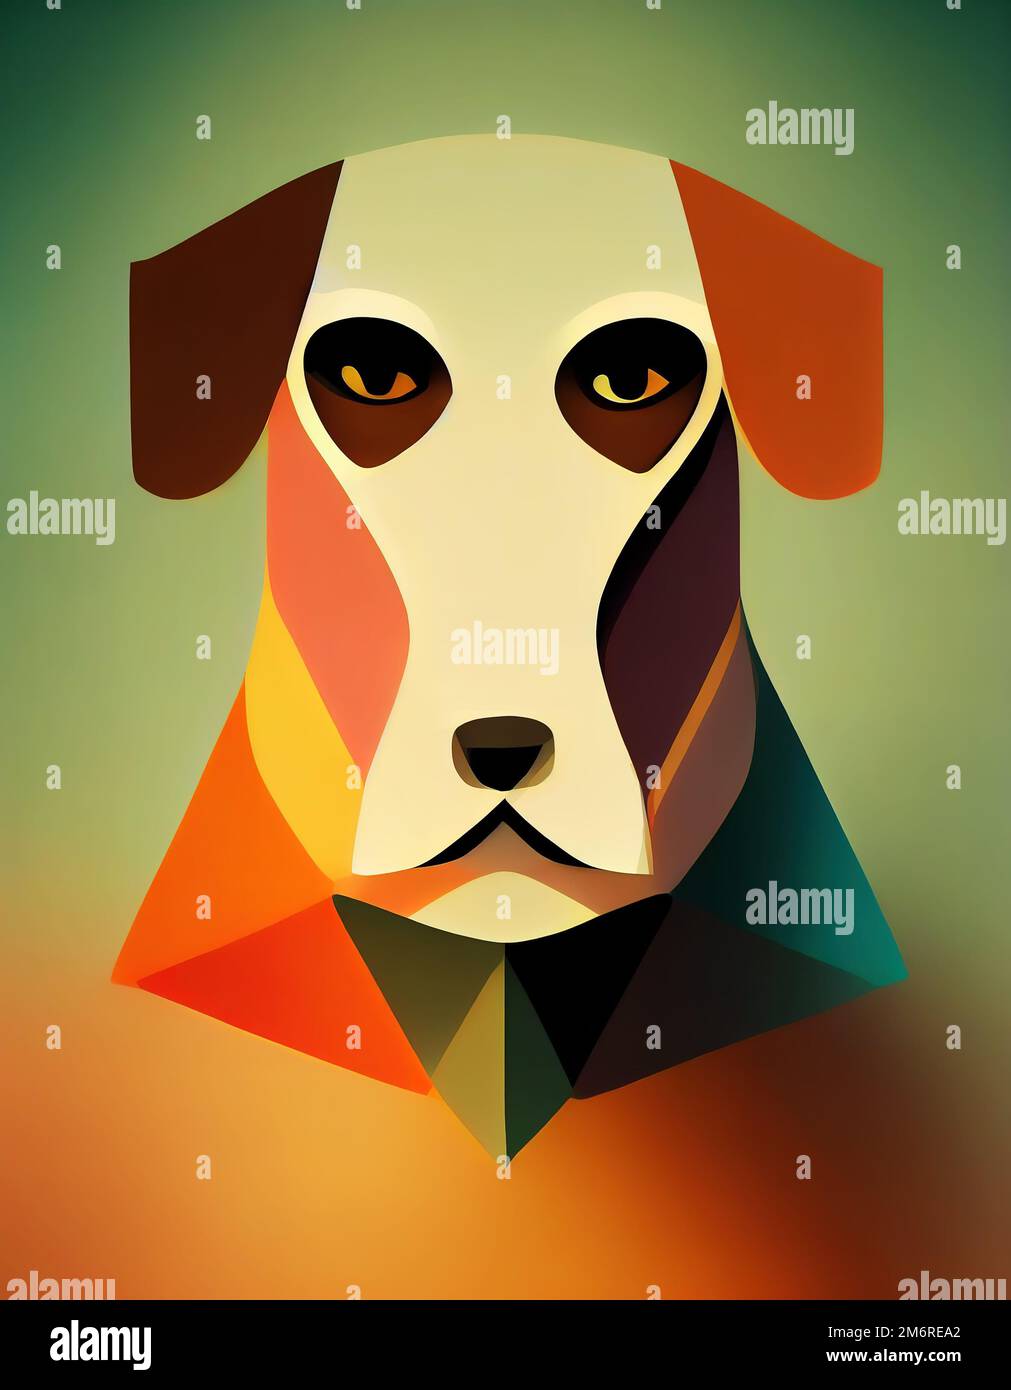 Multicolored geometric portrait of a dog. Digital illustration based on render by neural network Stock Photo